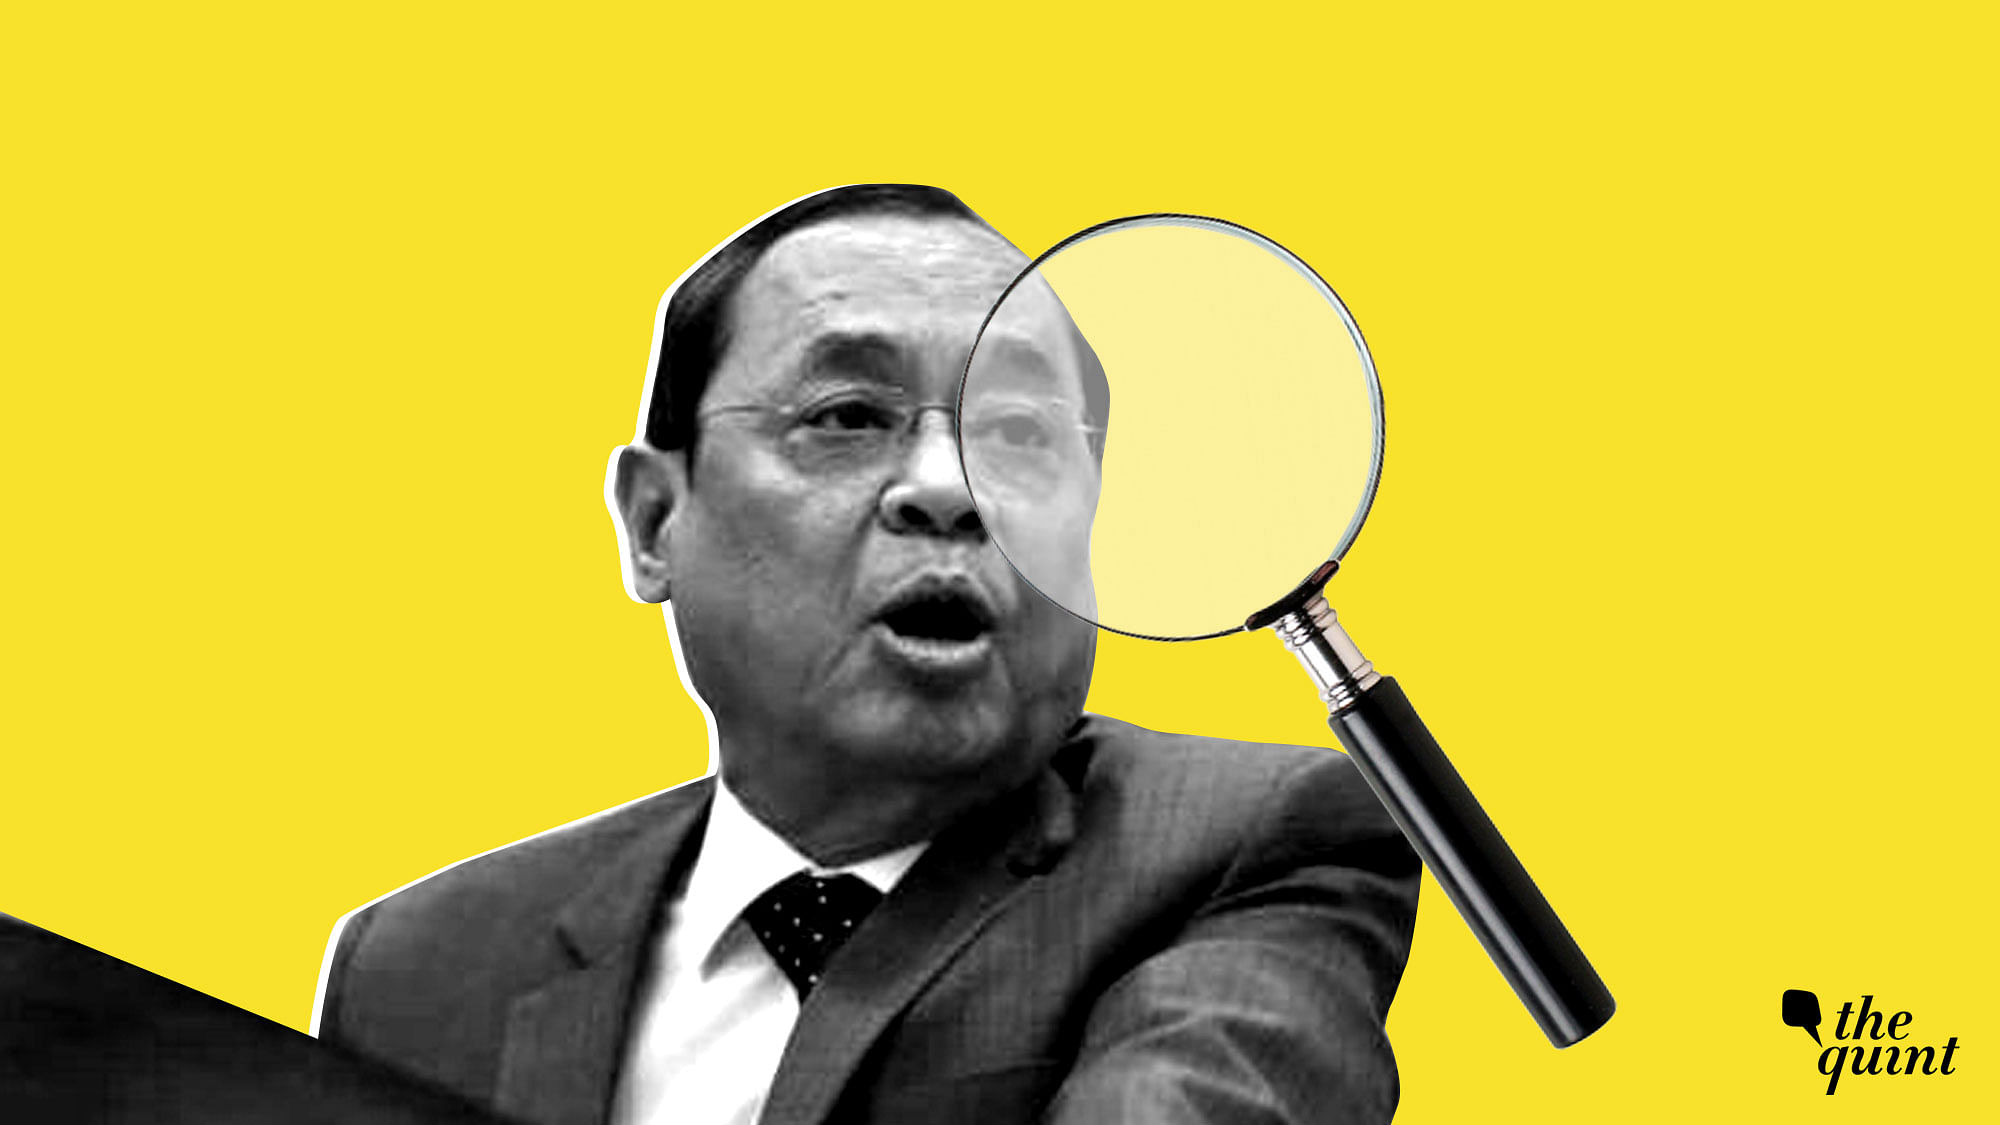 Inquiry into a “larger conspiracy” to frame Chief Justice of India Ranjan Gogoi was ordered by the SC. Image for representational purposes.